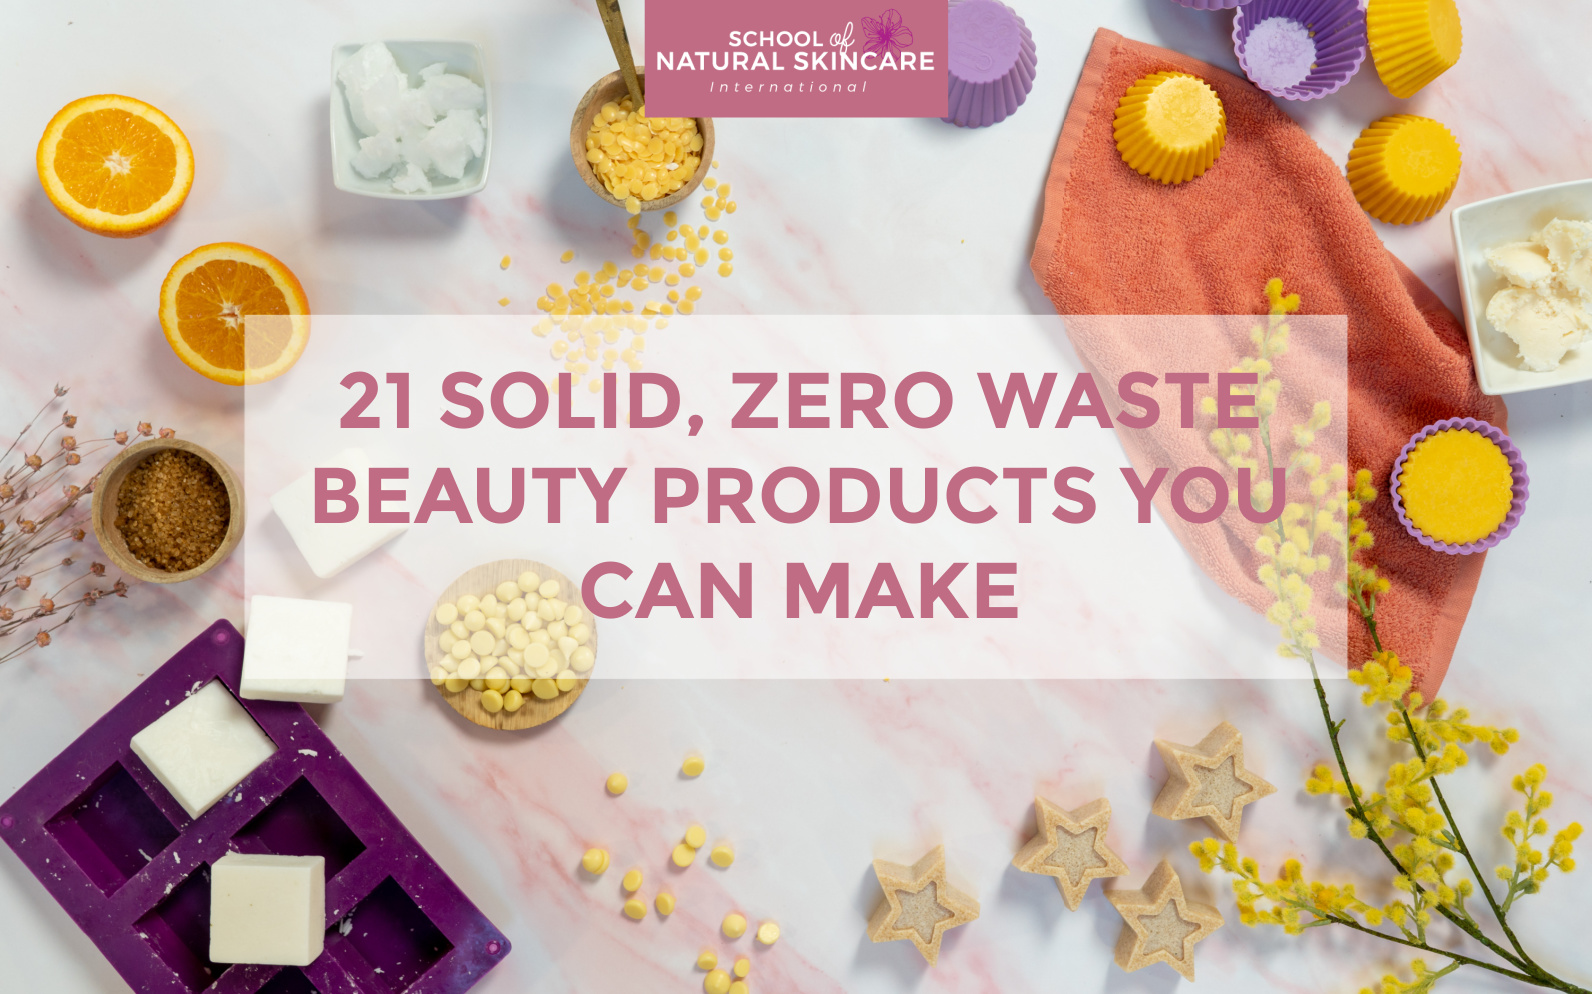 Formulating solid skincare products – what’s different? Zero Waste Formulation 